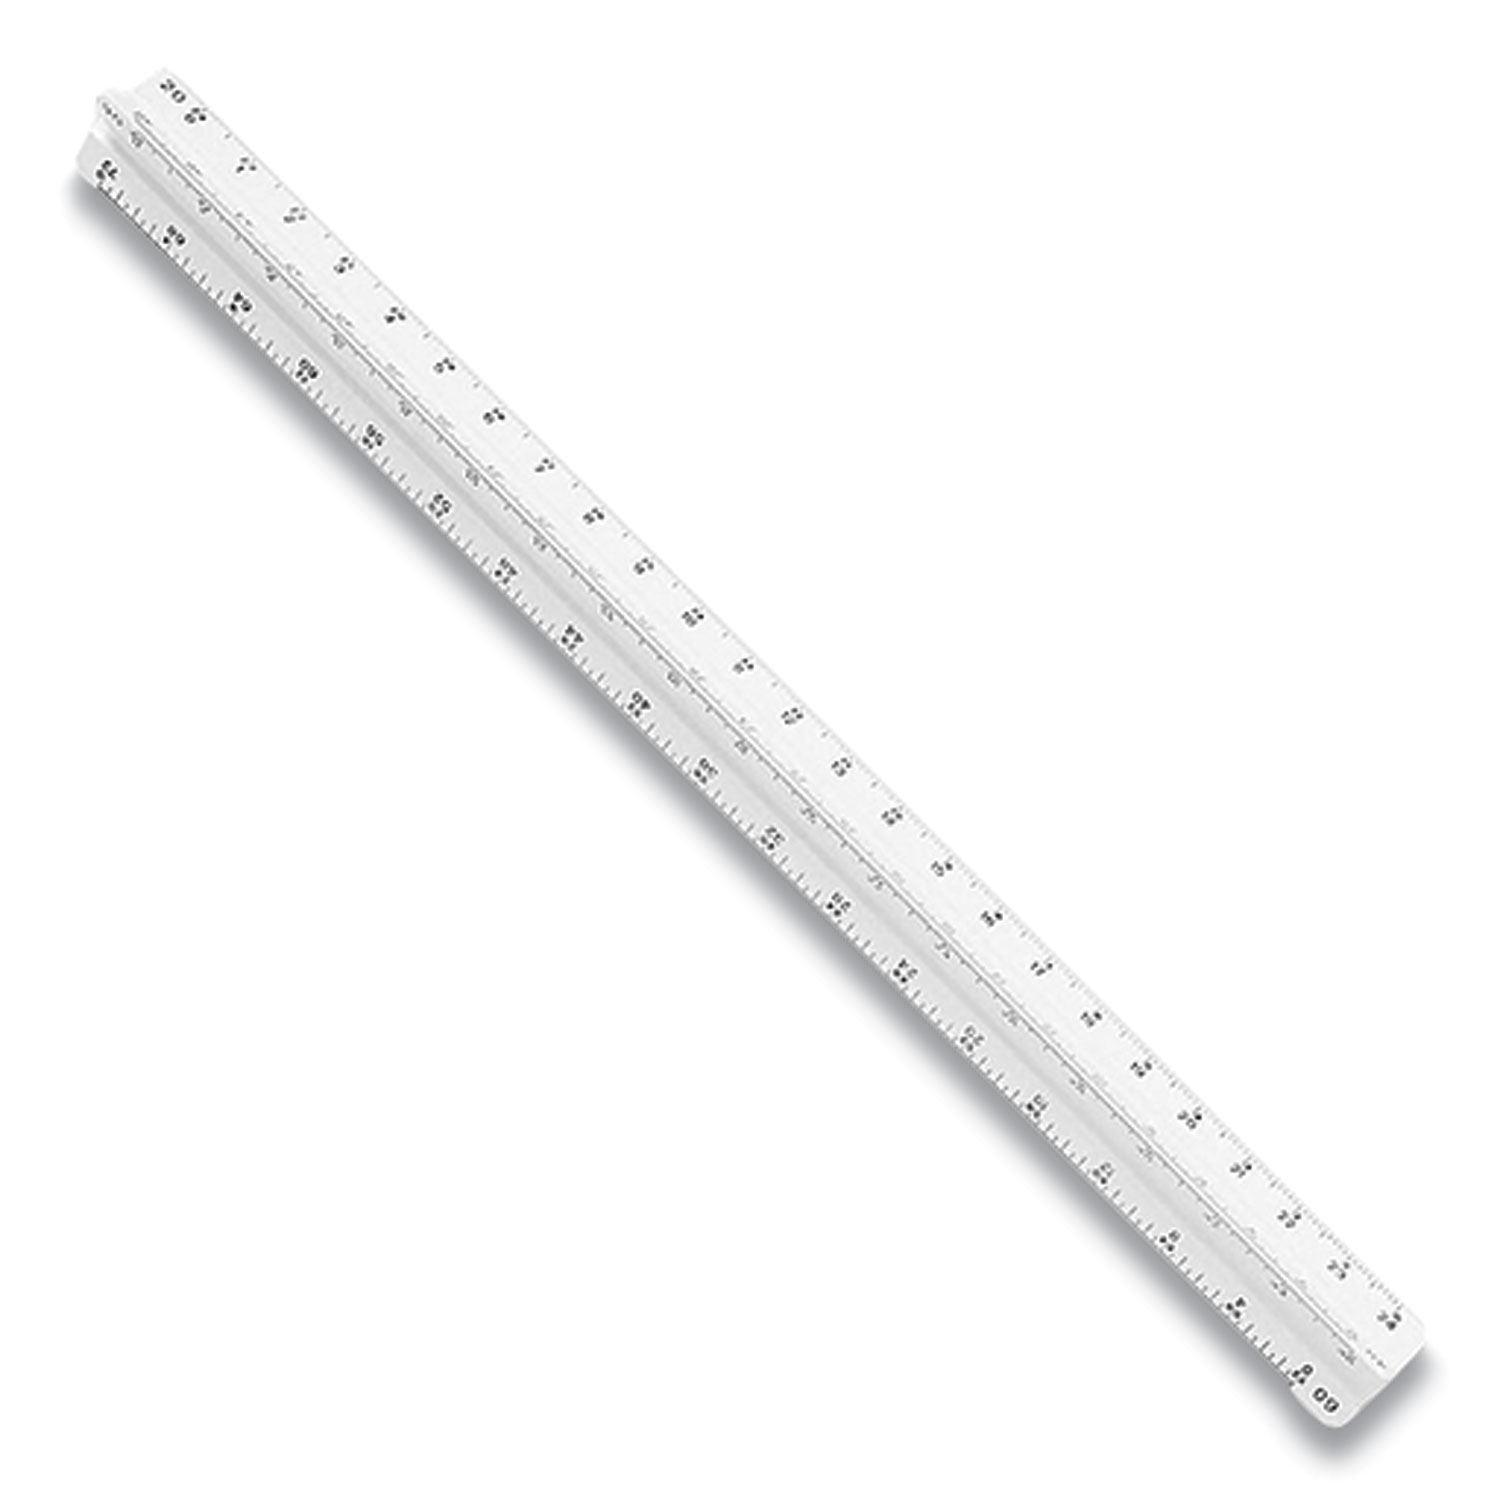 Staedtler® Triangular Scale Plastic Architects Ruler, 12, White